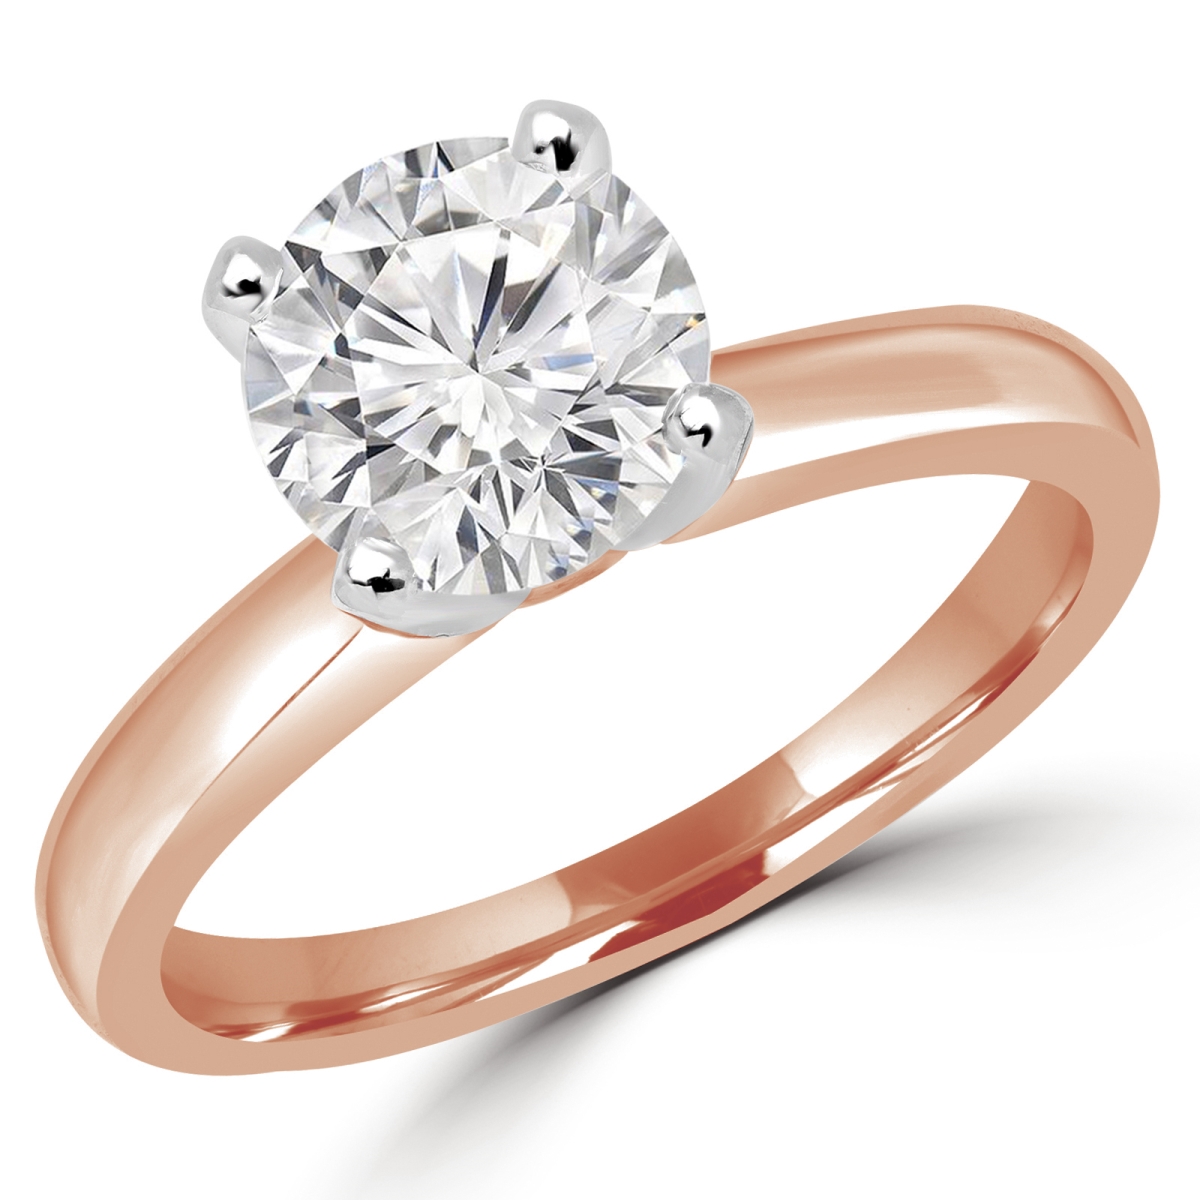 Picture of Majesty Diamonds MD180009-6.5 0.6 CT Round Diamond Solitaire Engagement Ring in 14K Rose Gold - Size 6.5